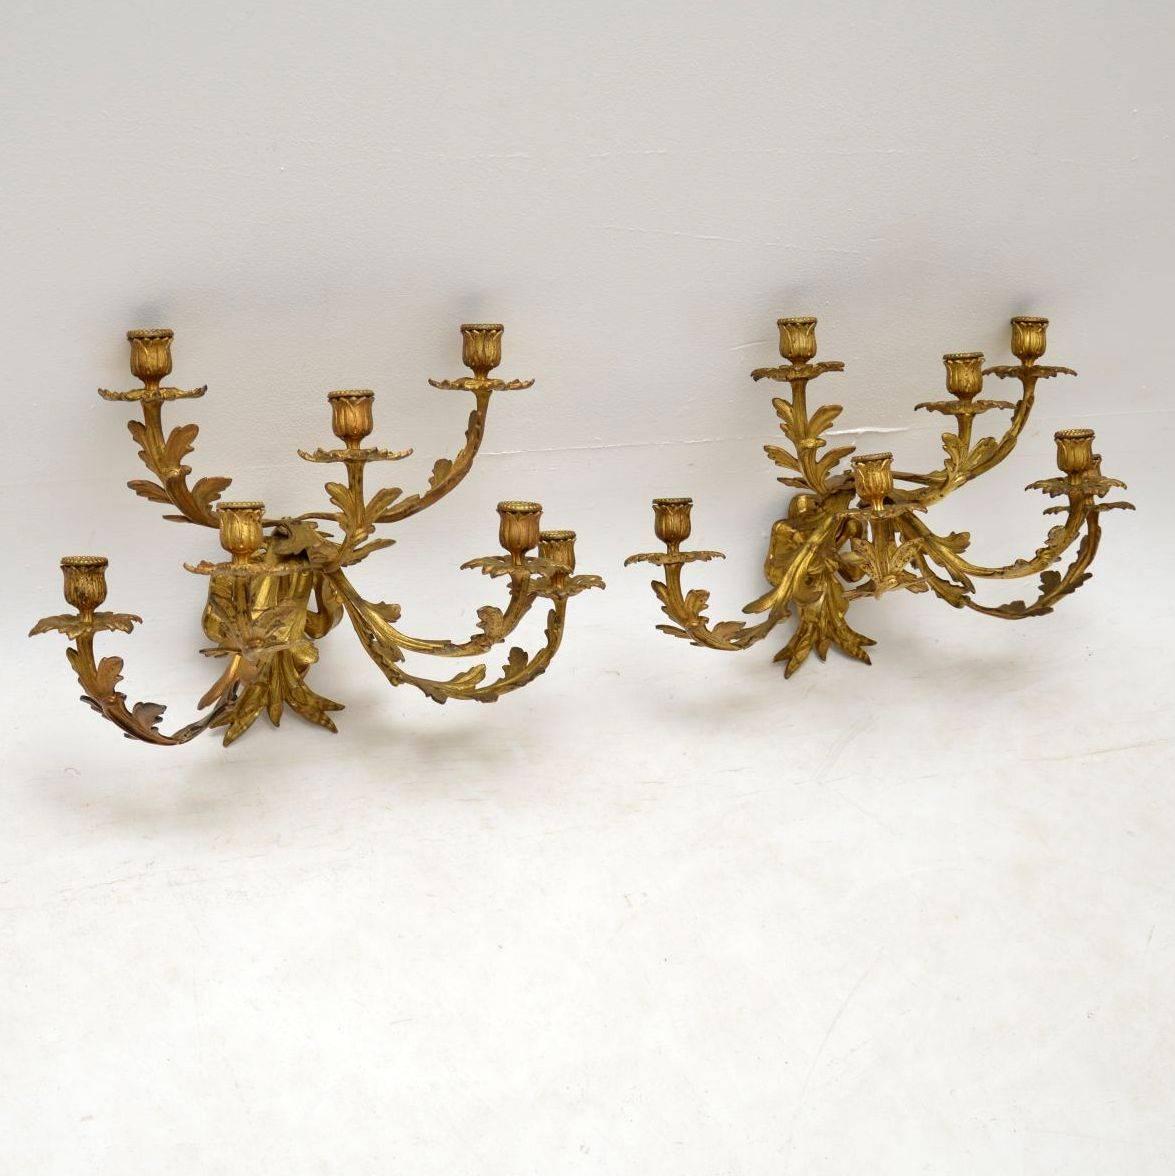 Measures: Large pair of antique French gilt bronze seven branch wall sconces in wonderful original condition with all the candle holders in place. It’s nice to find examples of these that haven’t been drilled and turned into lights. The castings and